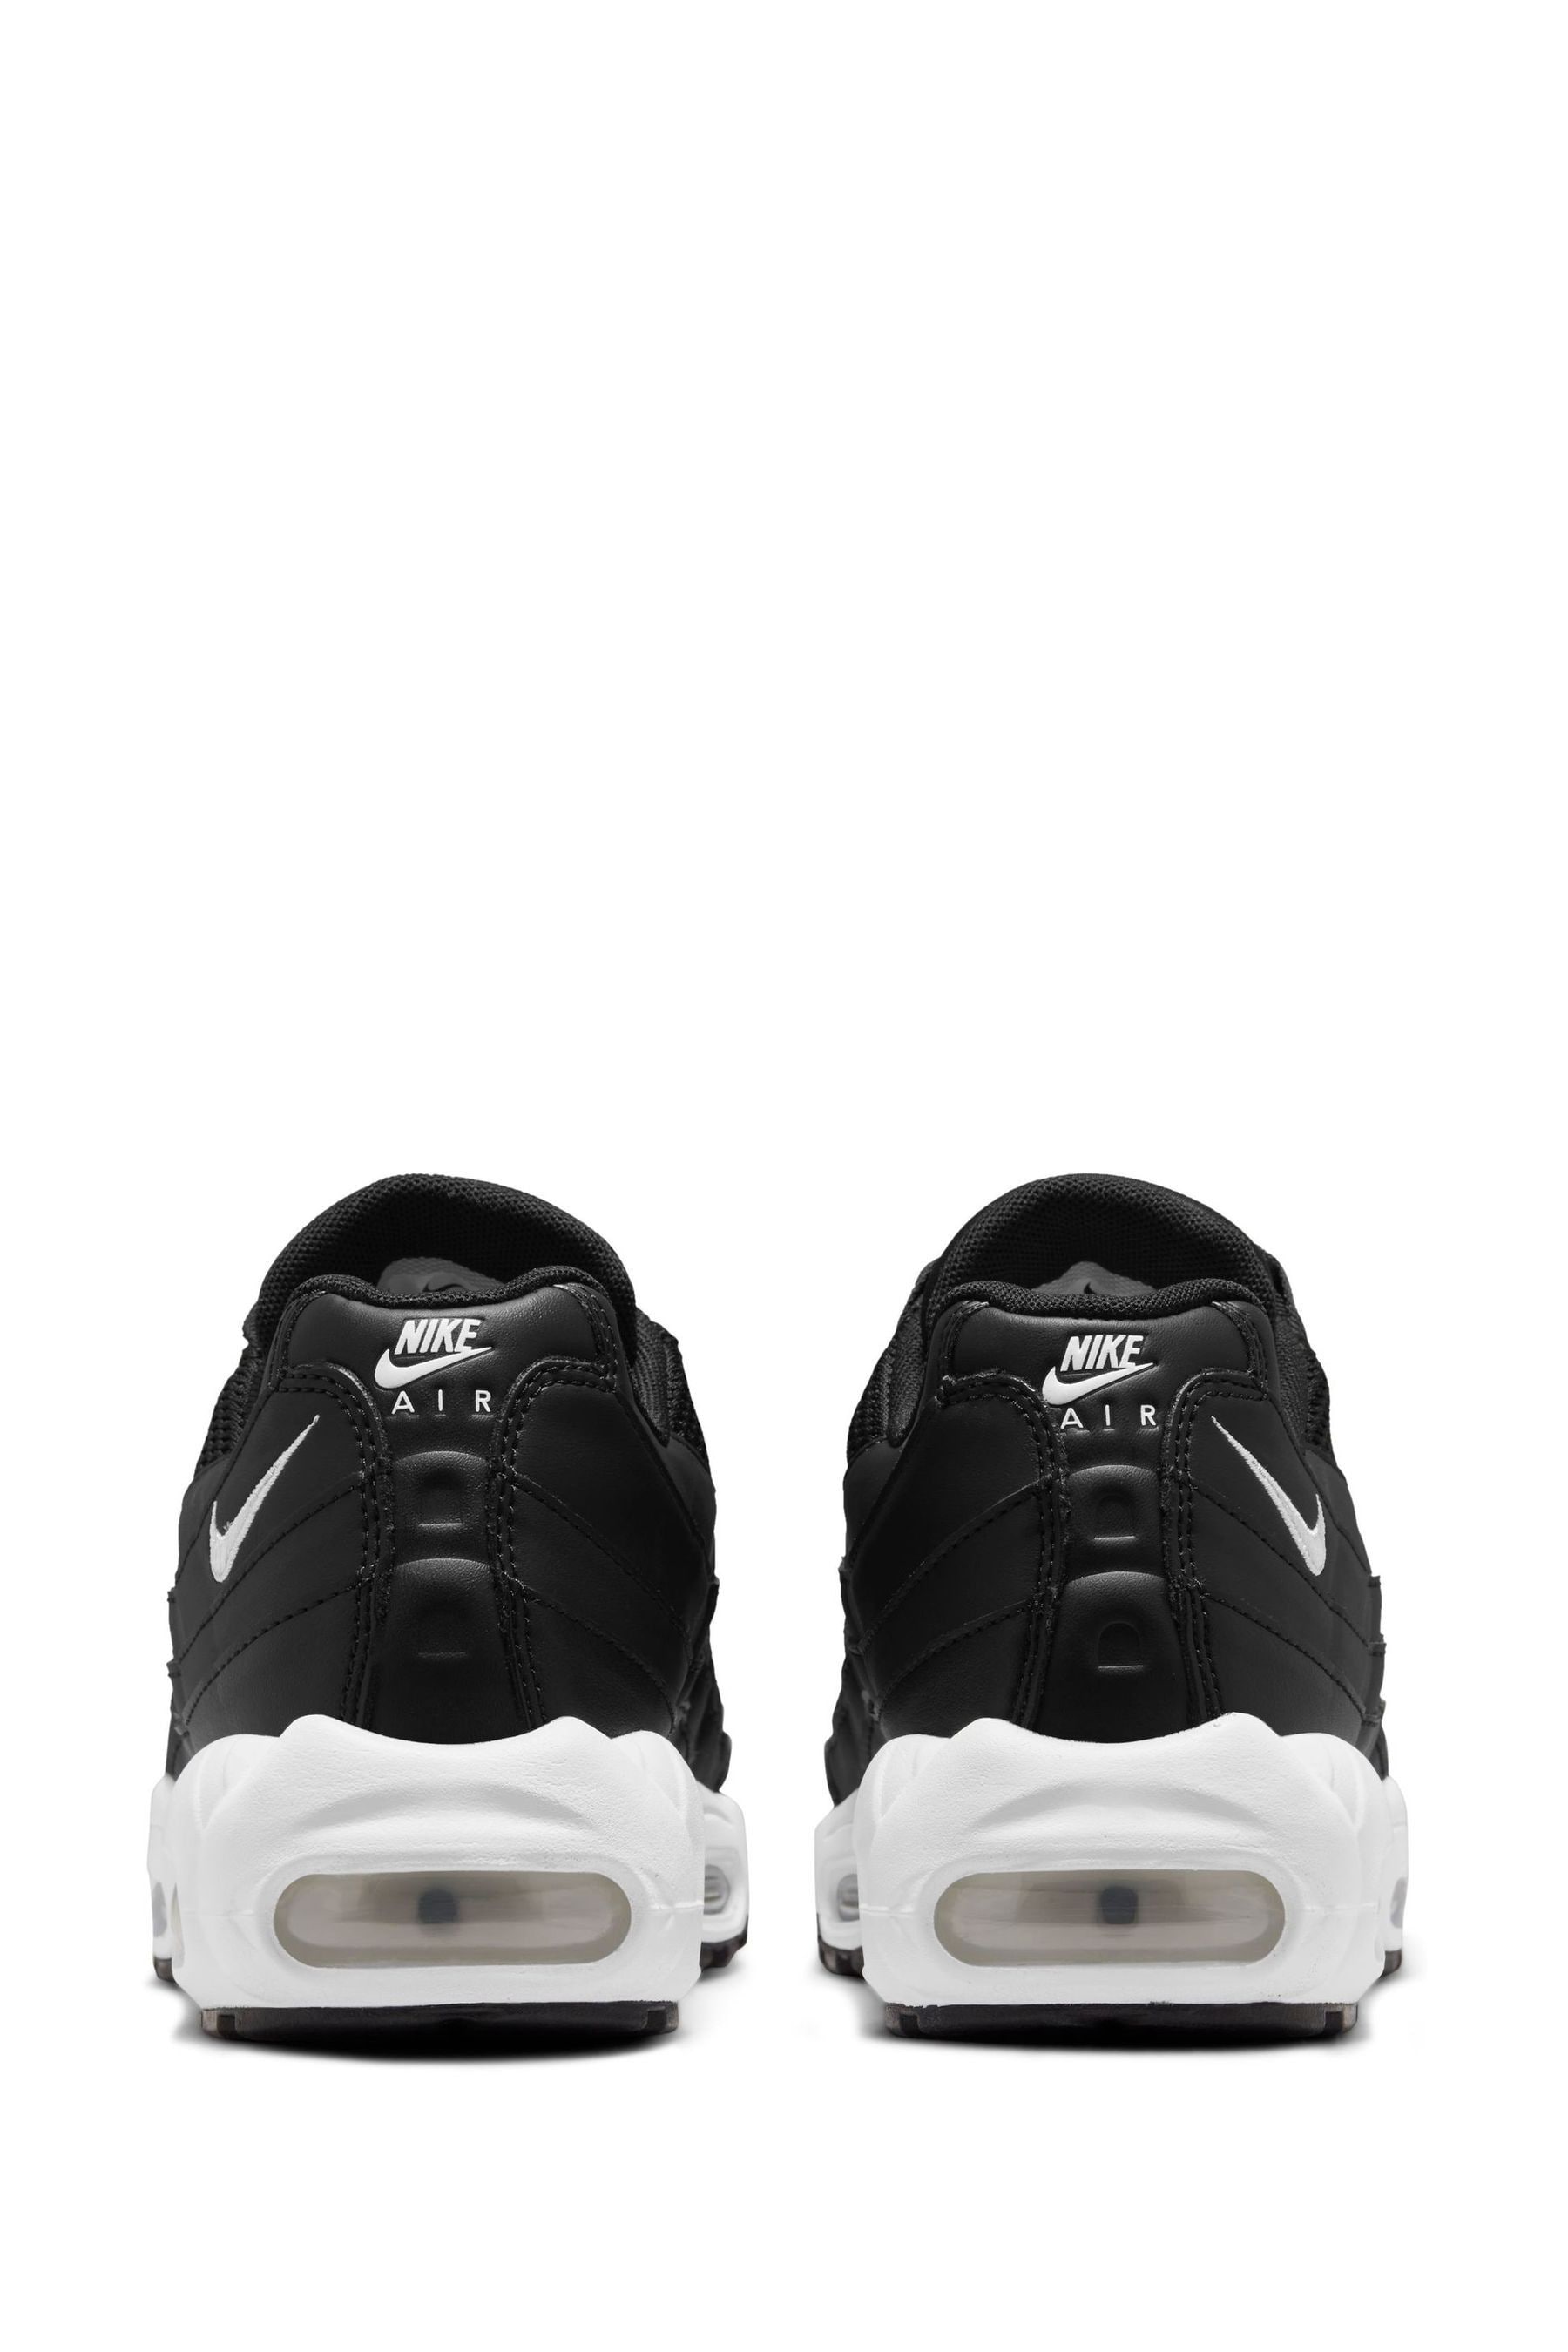 Buy Nike Black Air Max 95 Trainers from the Next UK online shop